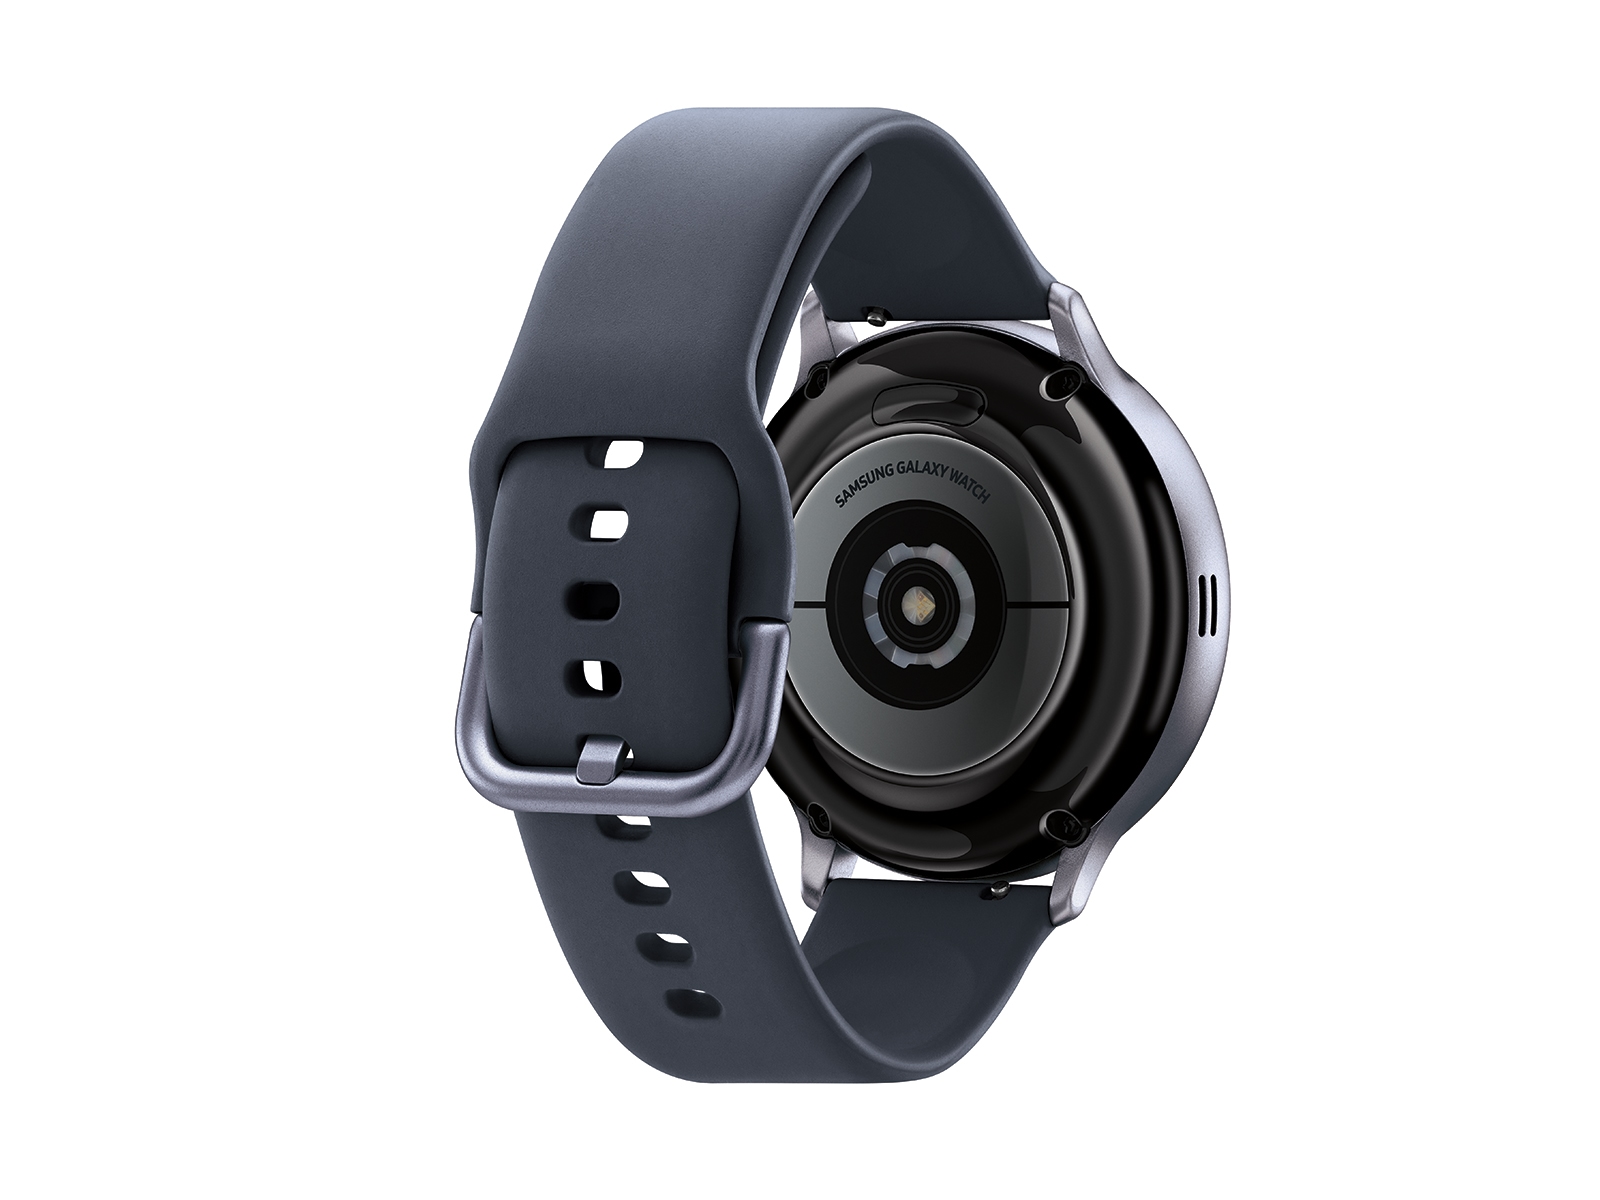 Comparing the six Samsung Gear smartwatches